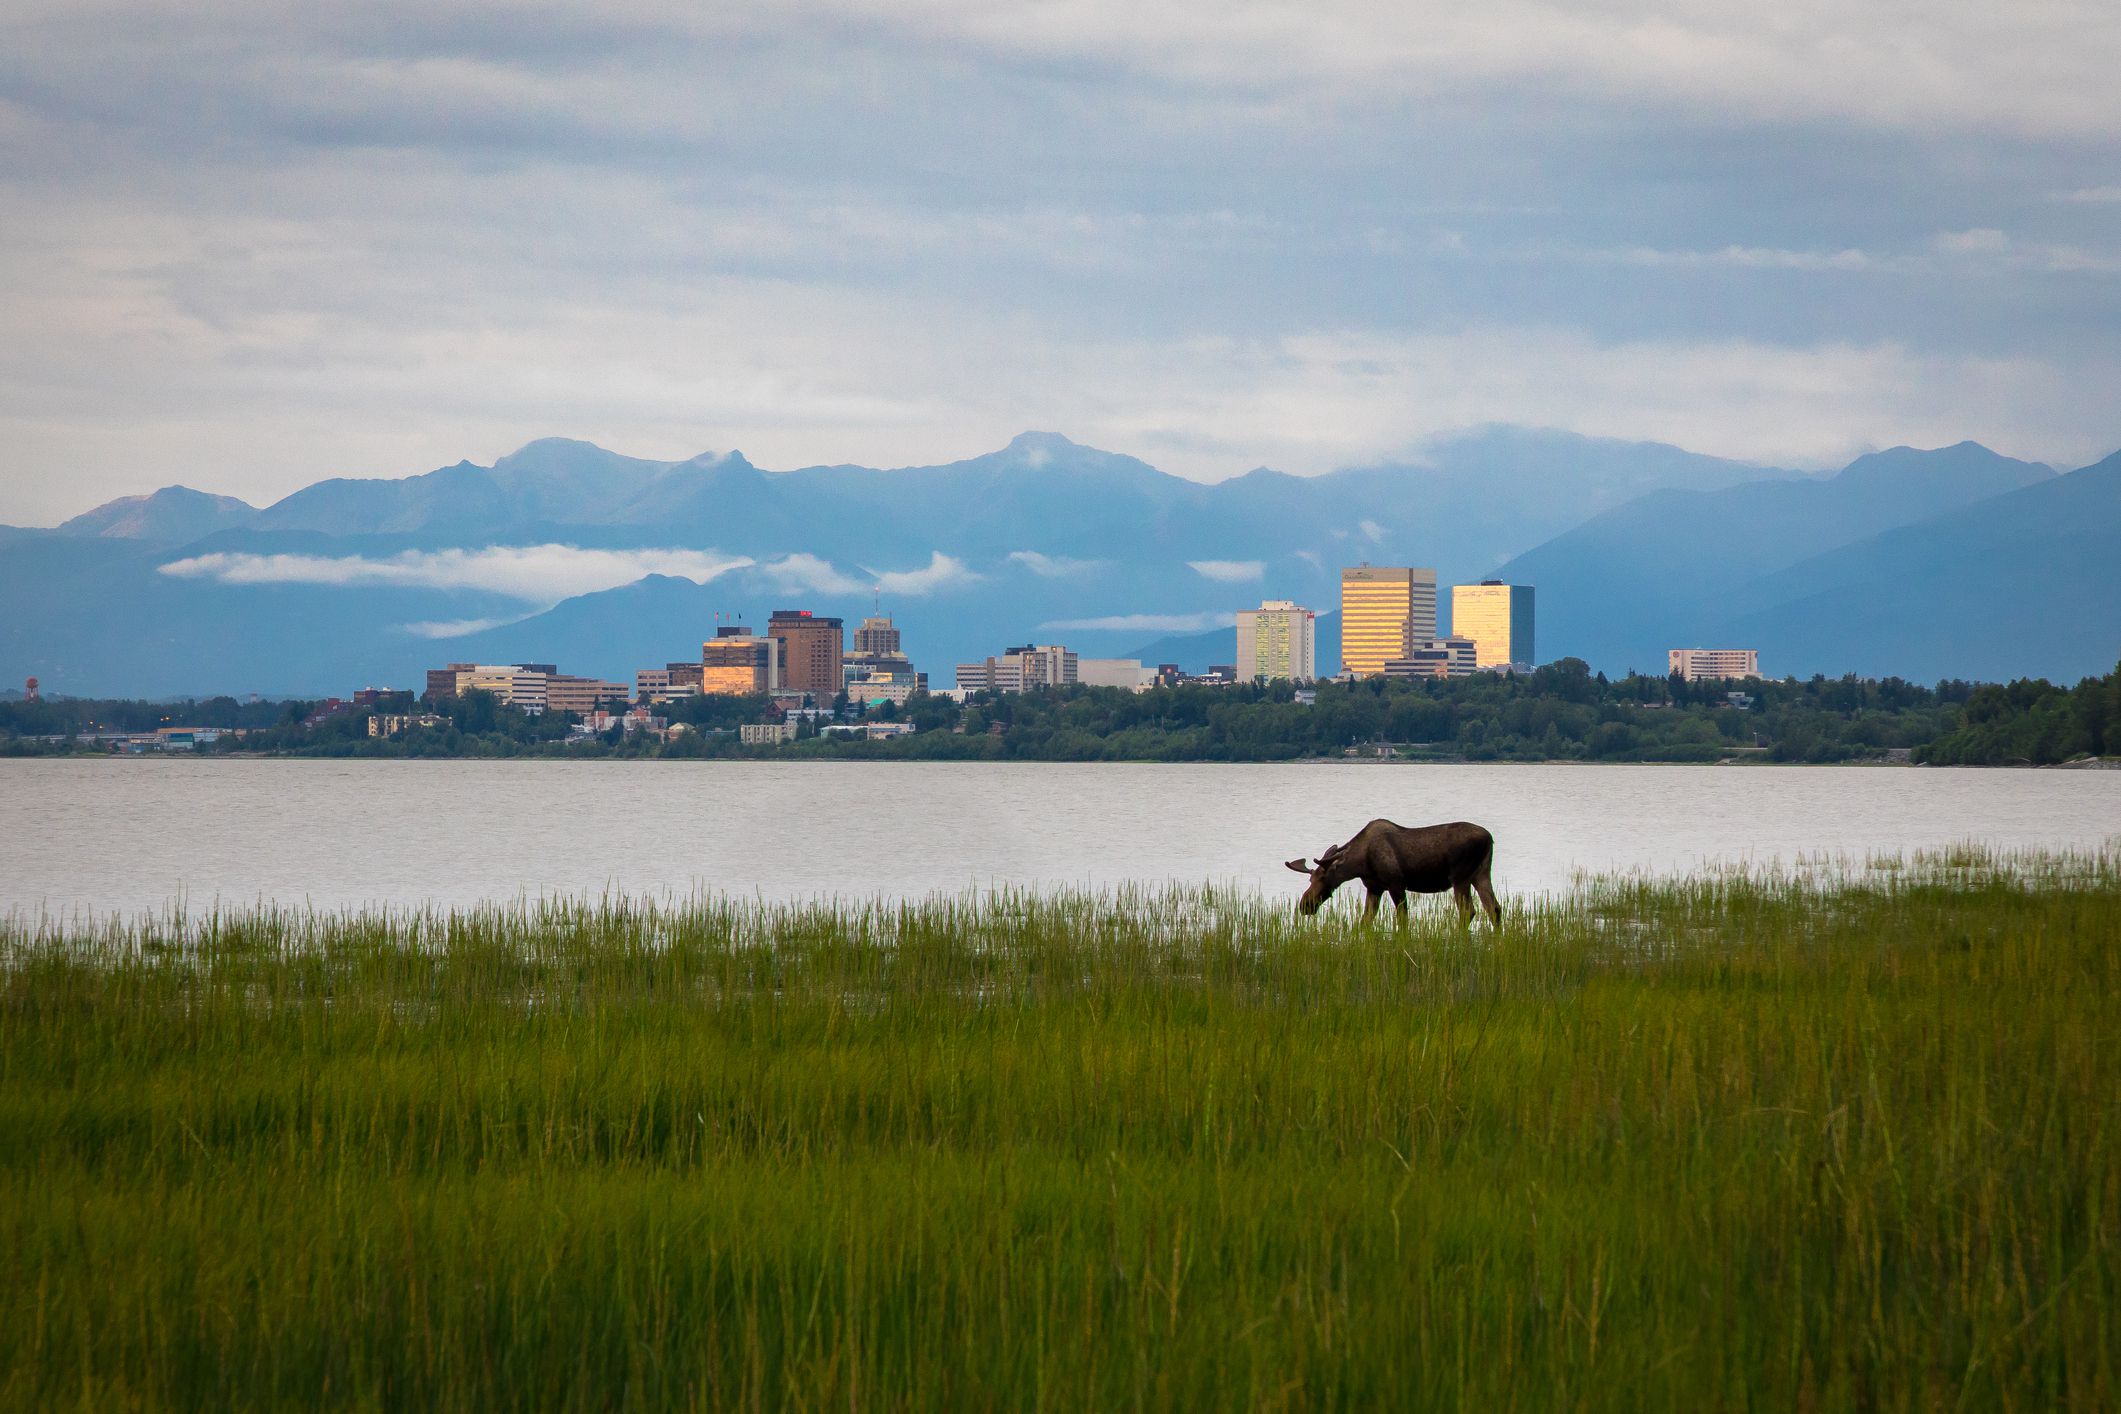 <p>Anchorage sits at the end of the Cook Inlet, right where it forks into two arms. If you want easy access to the coast but don’t want to give up the perks of big-city living — restaurants, breweries, shopping, museums, and more — then Anchorage is the spot for you.</p><ul><li>Population: 287,145</li><li>Median Household Income: $88,871</li><li>Cost of Living: 126.7% of U.S. average</li><li>Median Rent Price: $1,350</li><li>Home Price-to-Income Ratio: 3.69</li><li>Average Property Tax: 1.41%</li></ul><p class="padding-top-ms u-margin-bottom-ms"><b>Housing Affordability: </b>Living in Anchorage has its perks, but you’ll pay for those. The median cost of rent is $1,350, and the median home price is more than $325,000.</p>